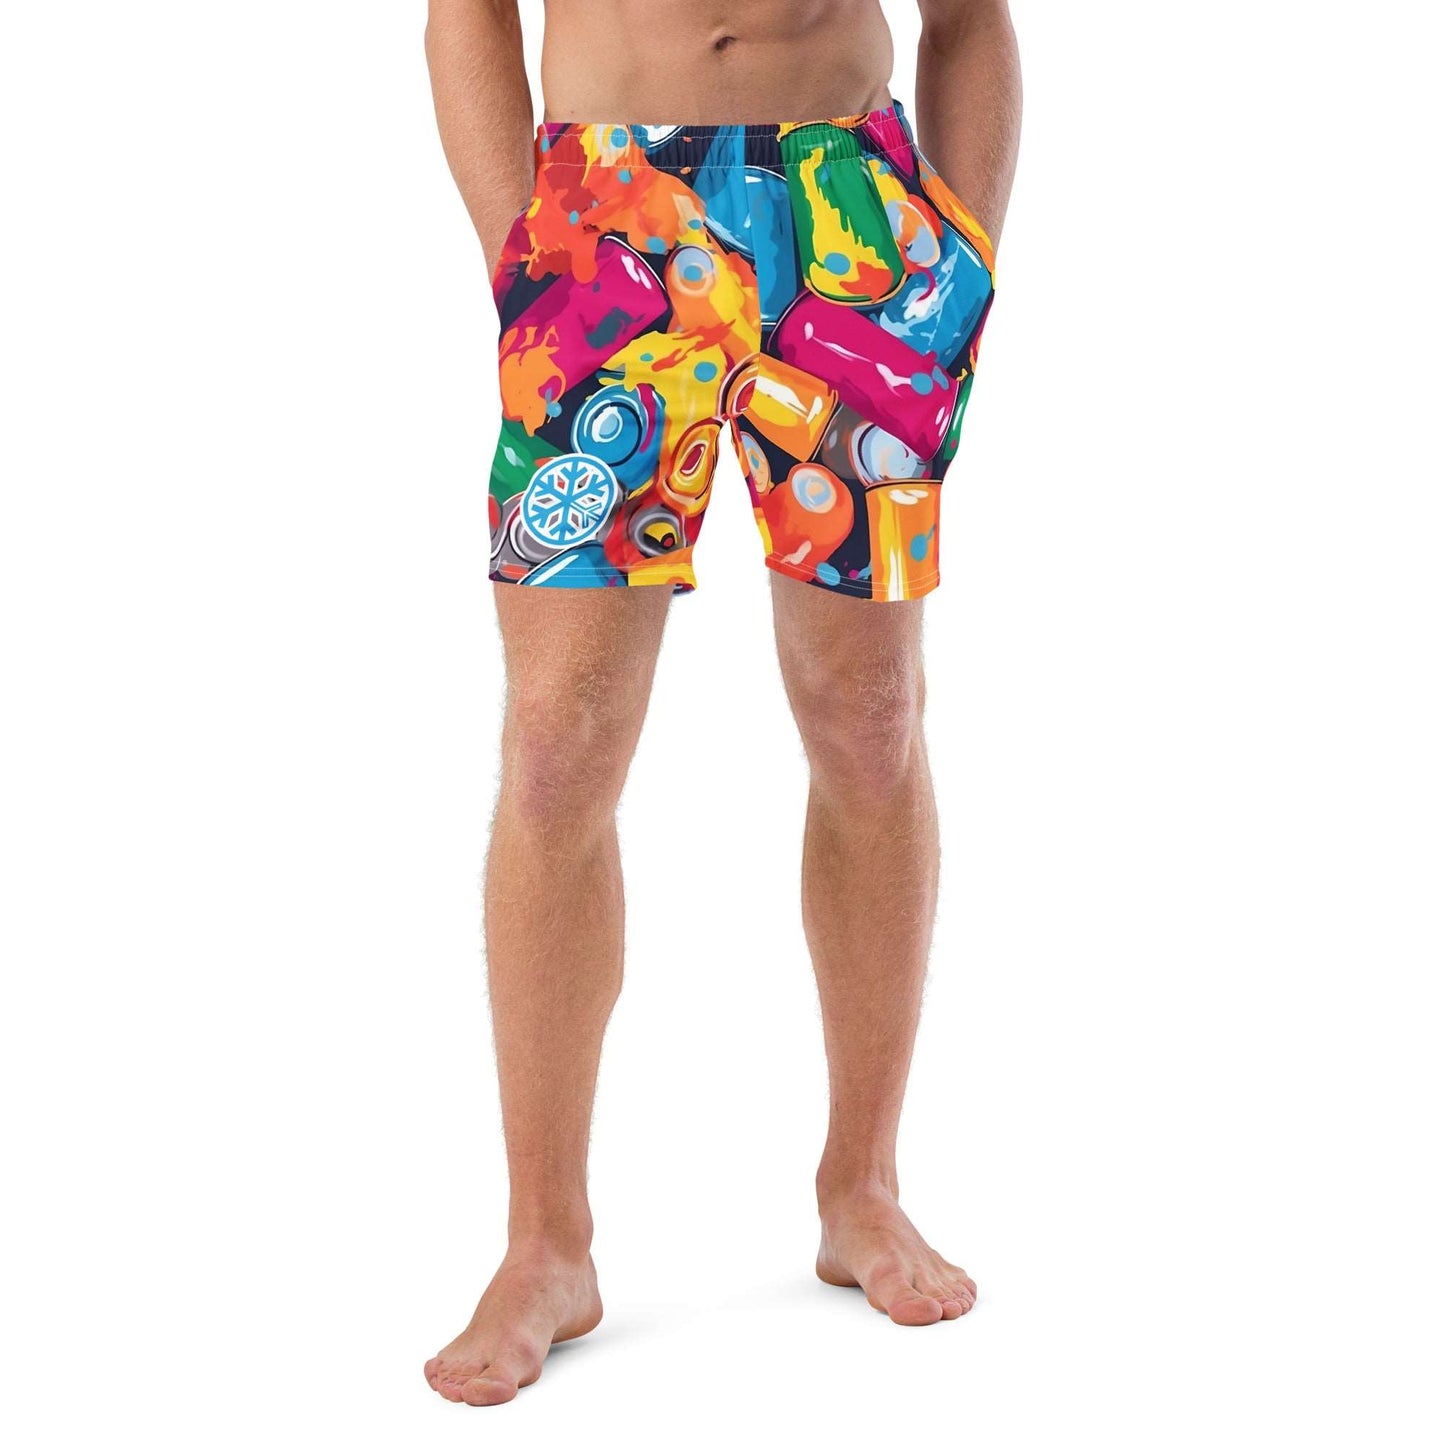 man front with spray cans swim shorts by B.Different Clothing independent streetwear inspired by street art graffiti